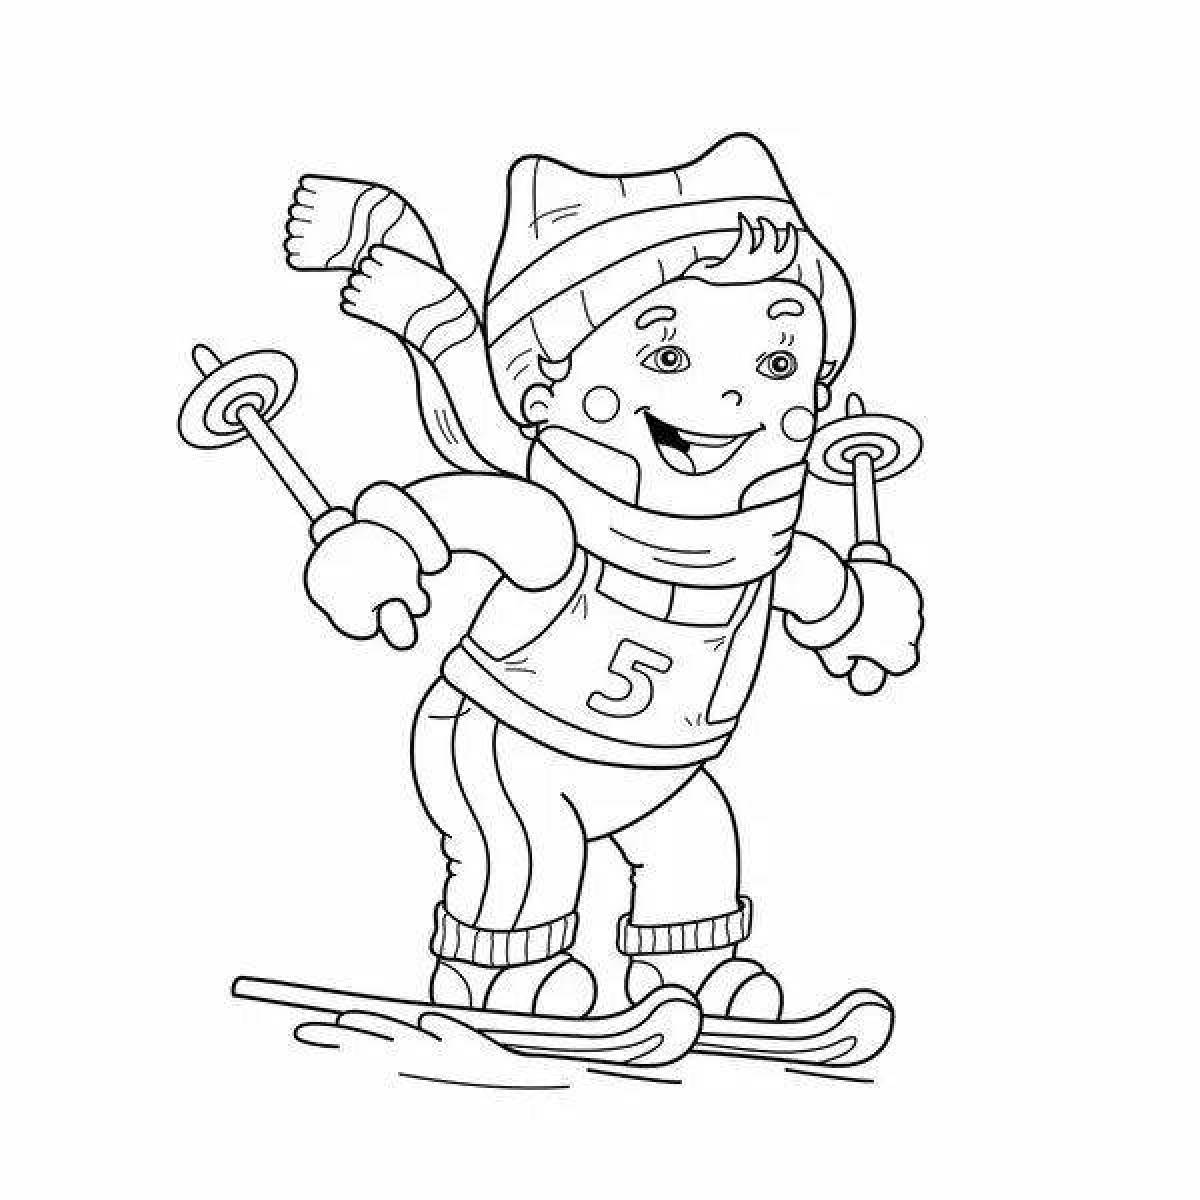 Playful winter sports coloring page for kids